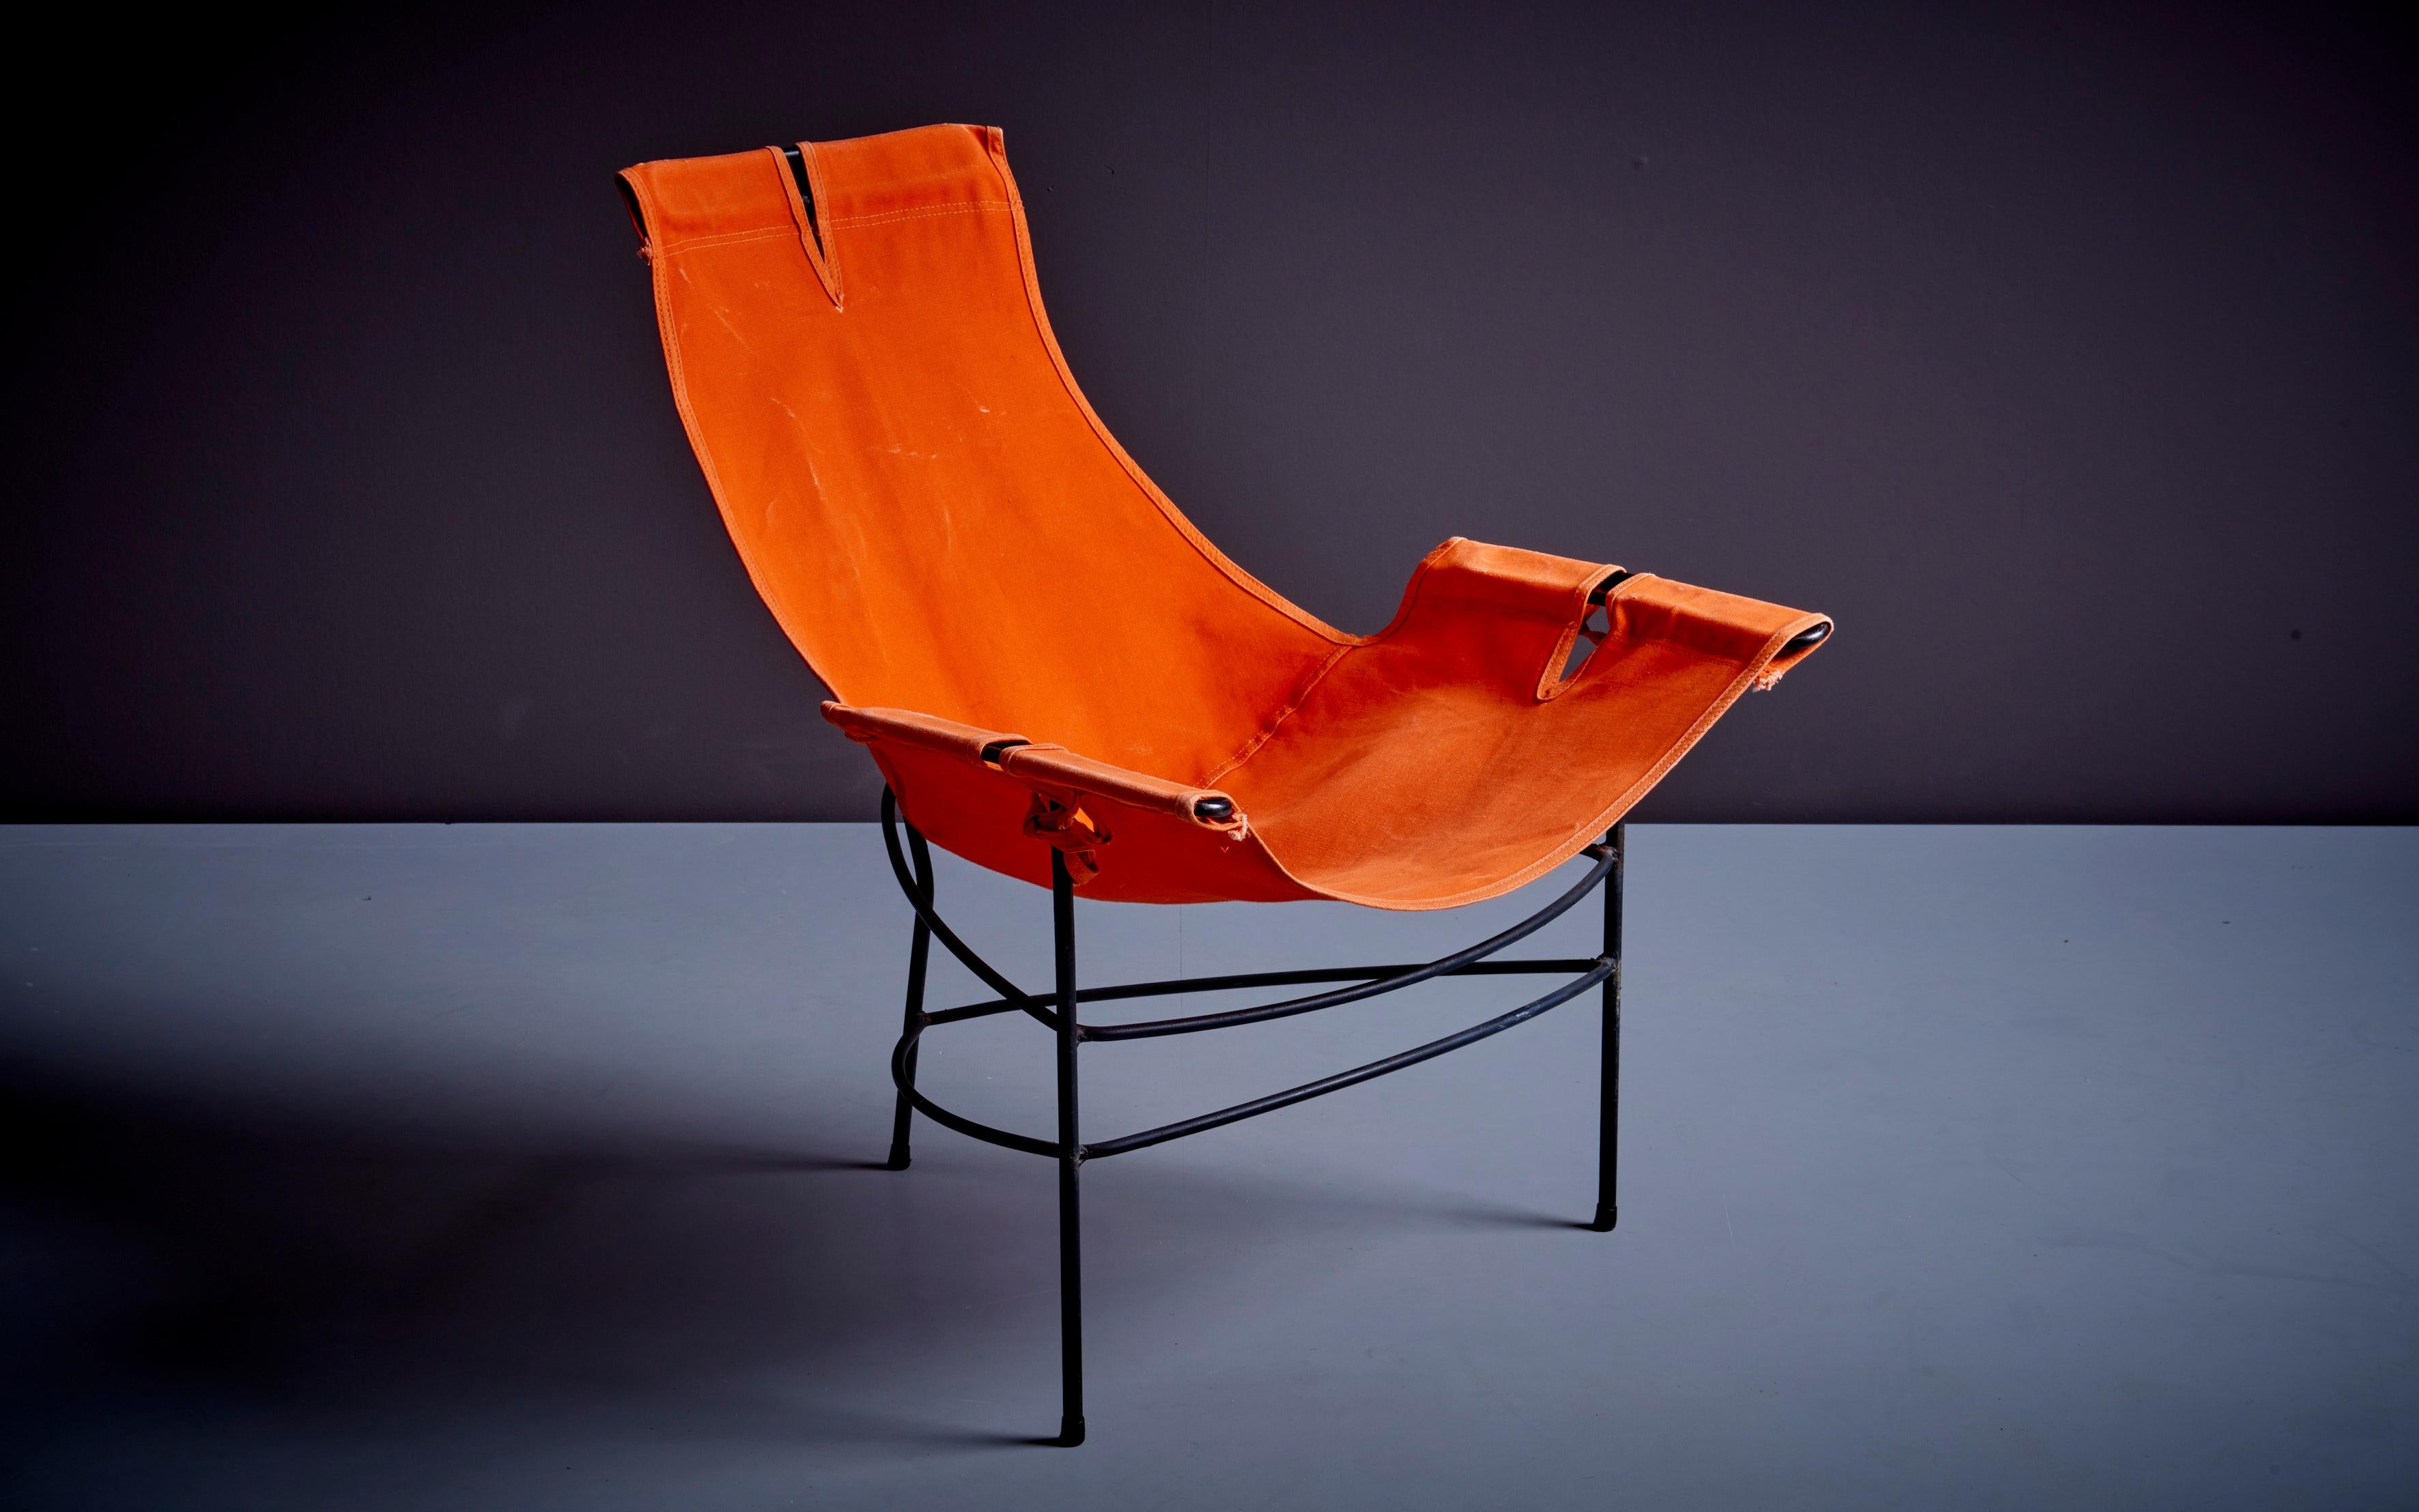 Pair of 2 Lounge Chairs by Jerry Johnson in Orange Canvas, USA, 1950s For Sale 4